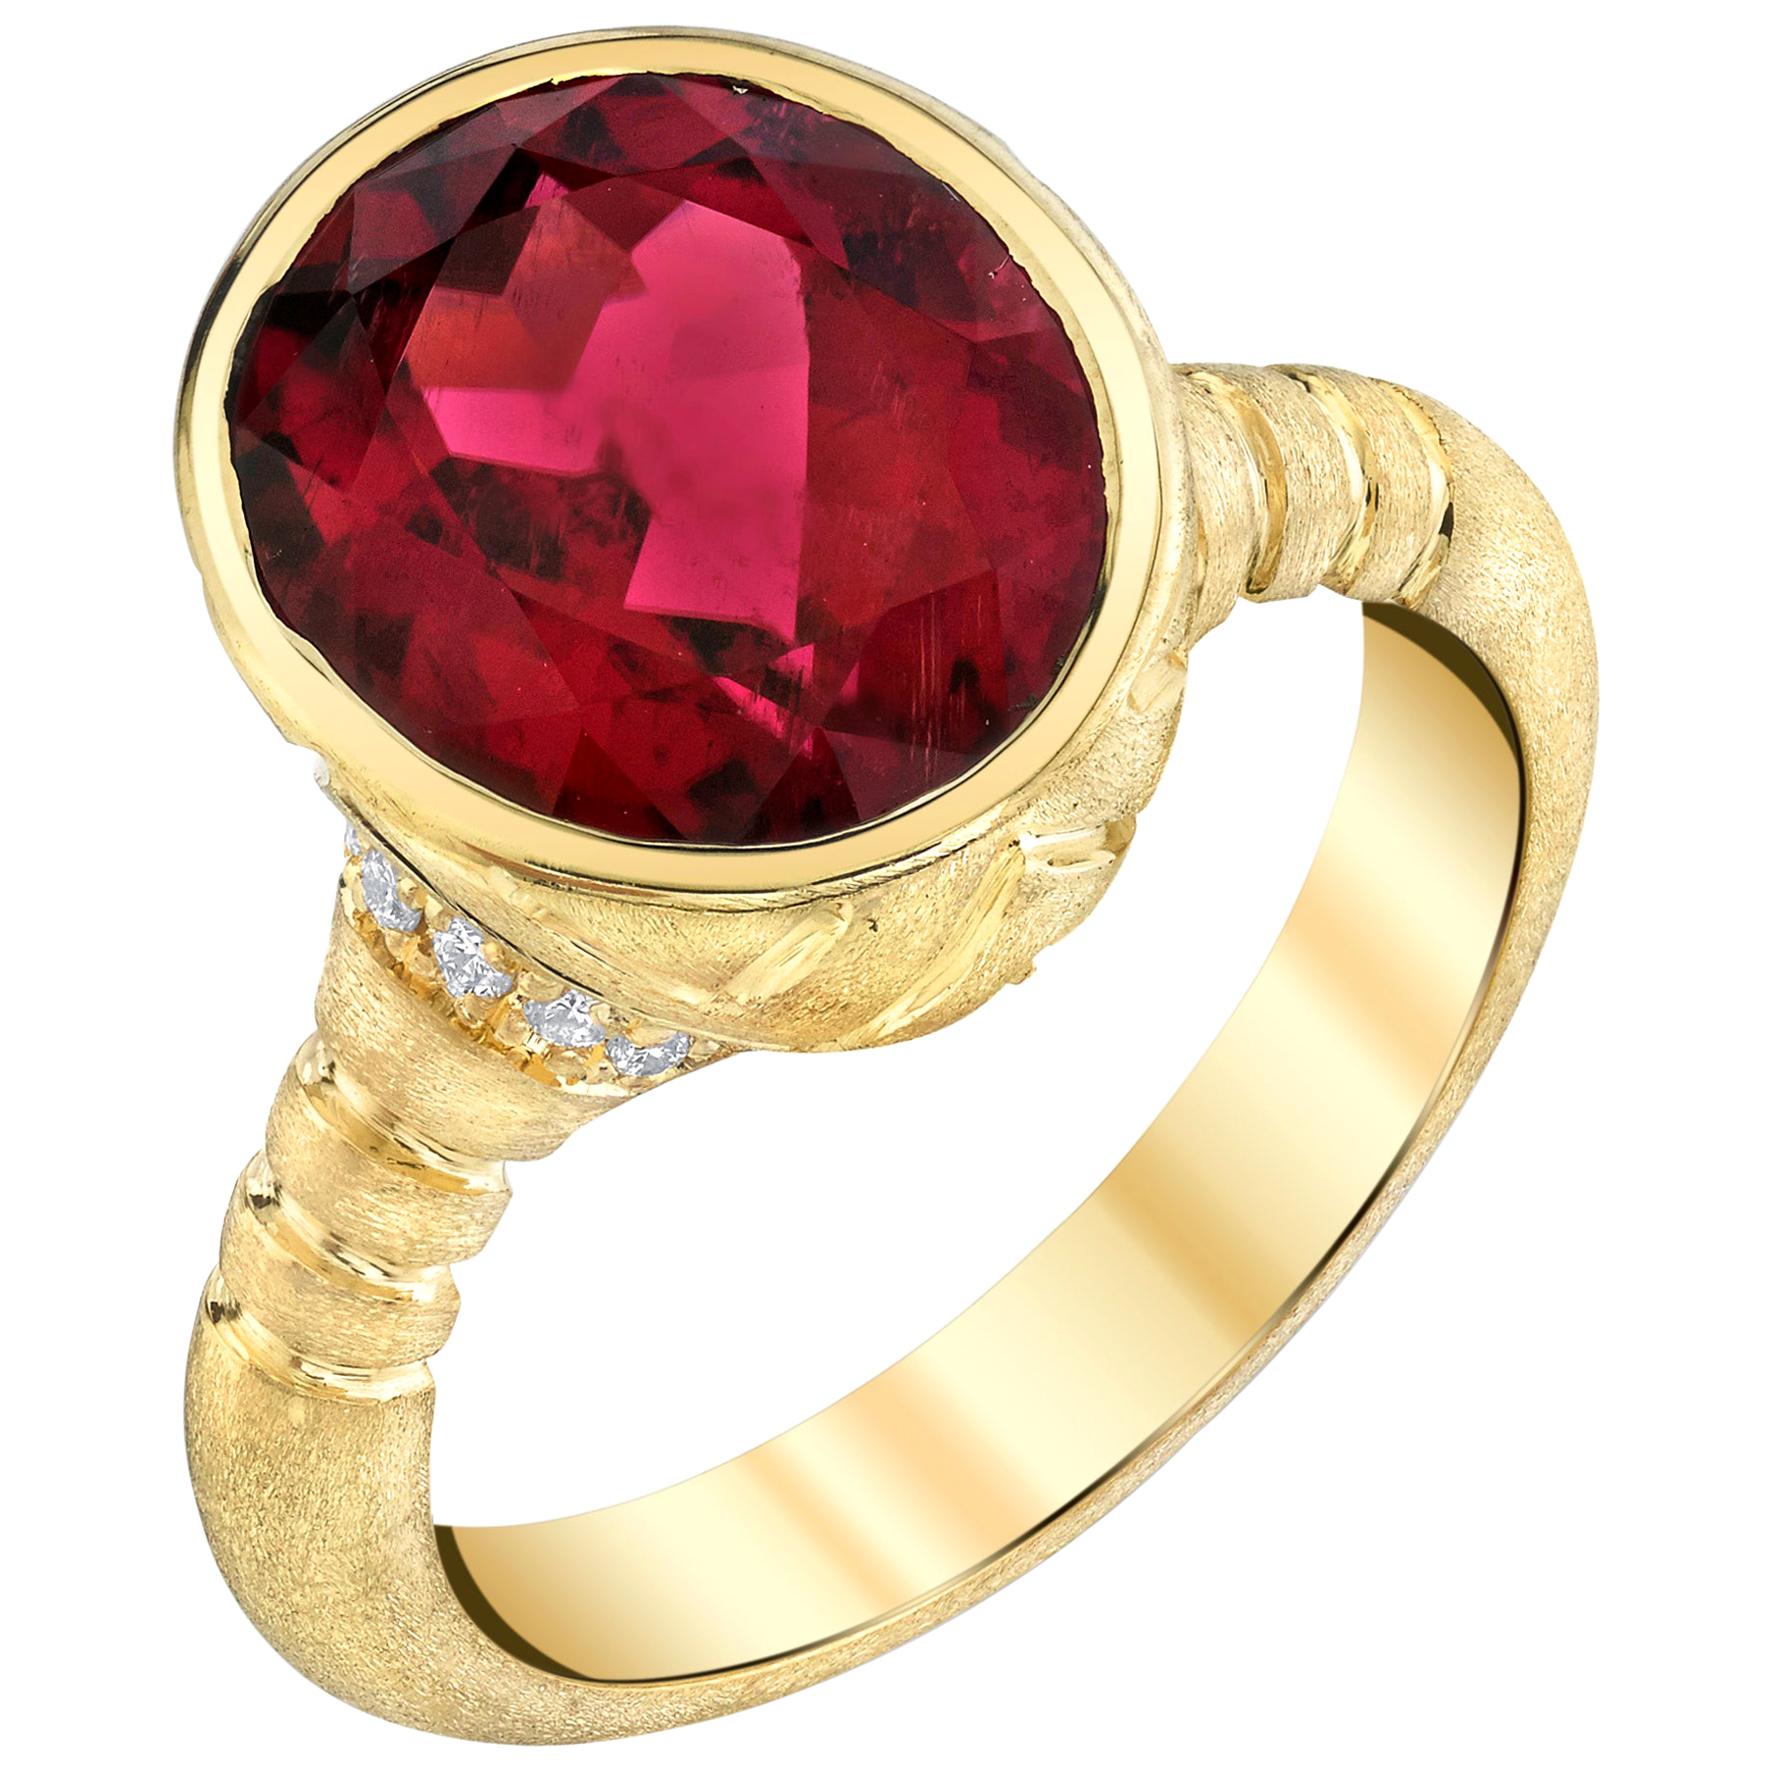 5.35 Carat Rubellite Tourmaline and Diamond Band Ring in 18k Yellow Gold  For Sale